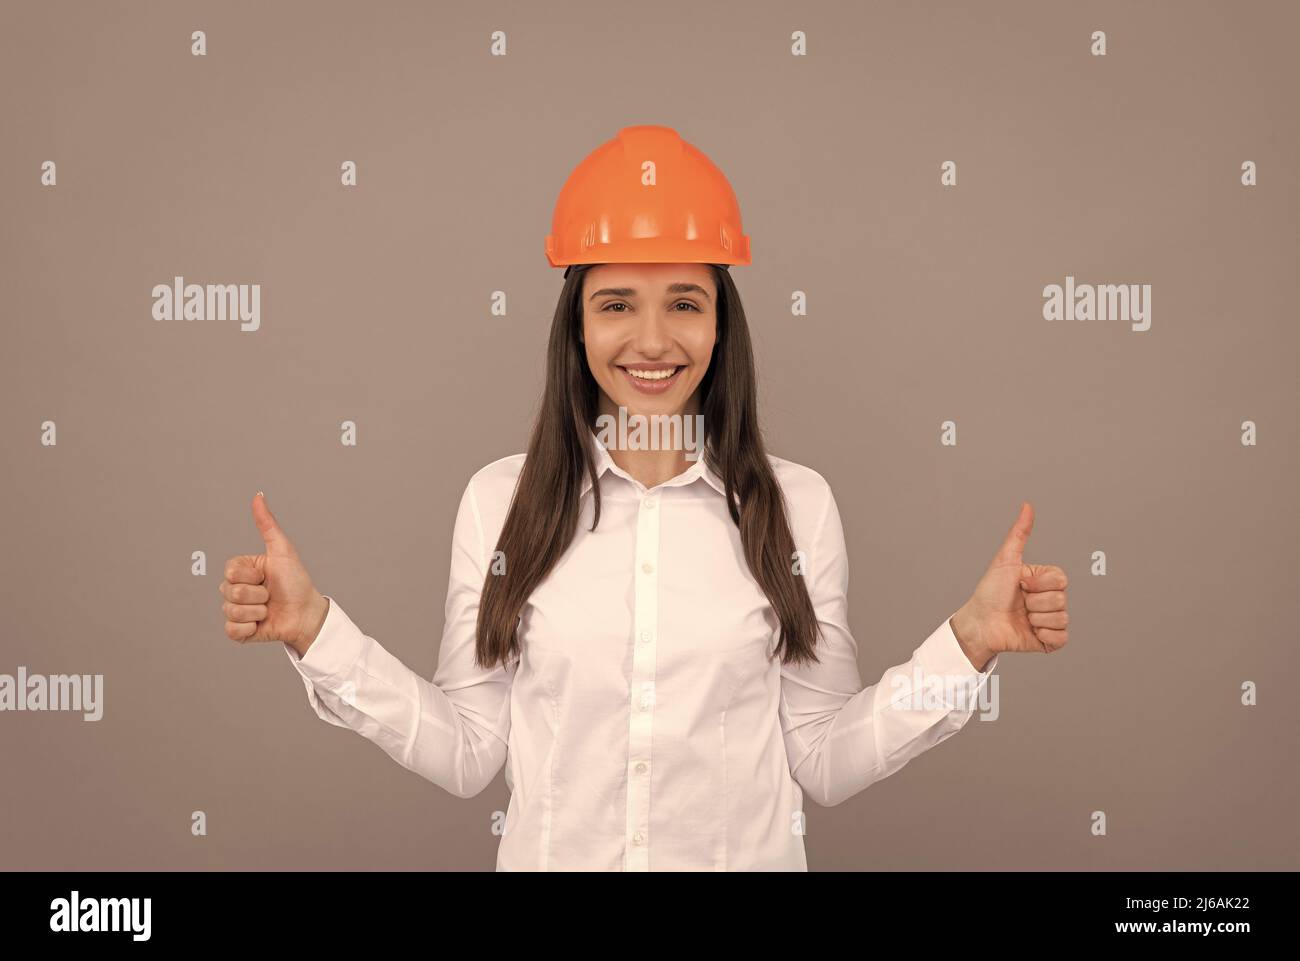 happy woman in protective helmet and white shirt showing thumb up gesture, good result Stock Photo